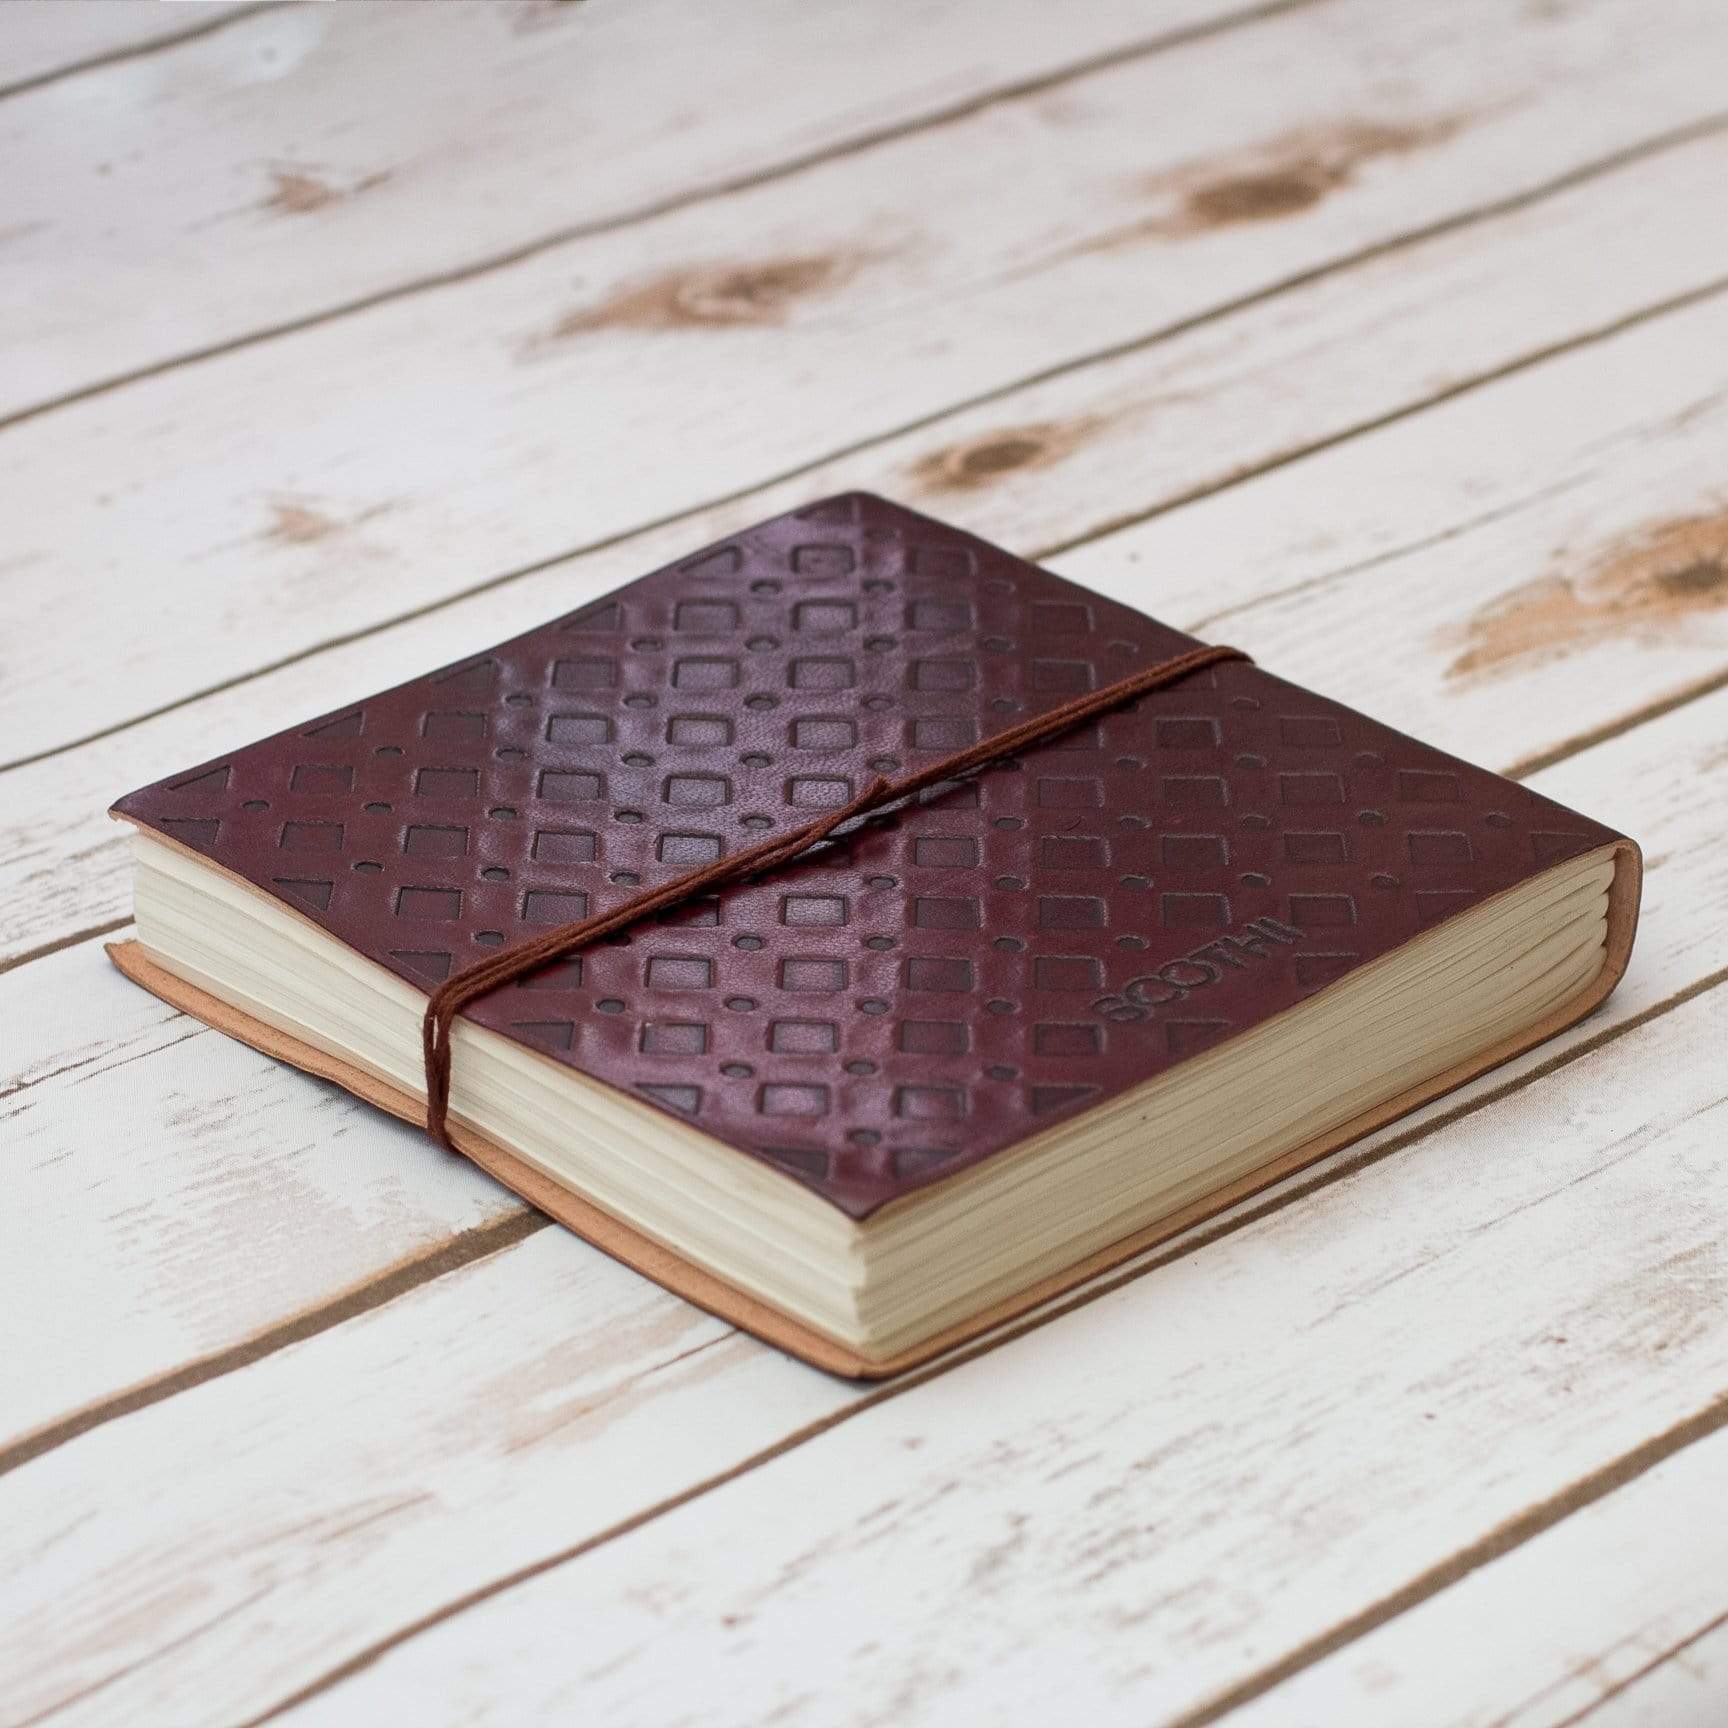 Directions Square Handmade Leather Journal - Leather Journals By Soothi